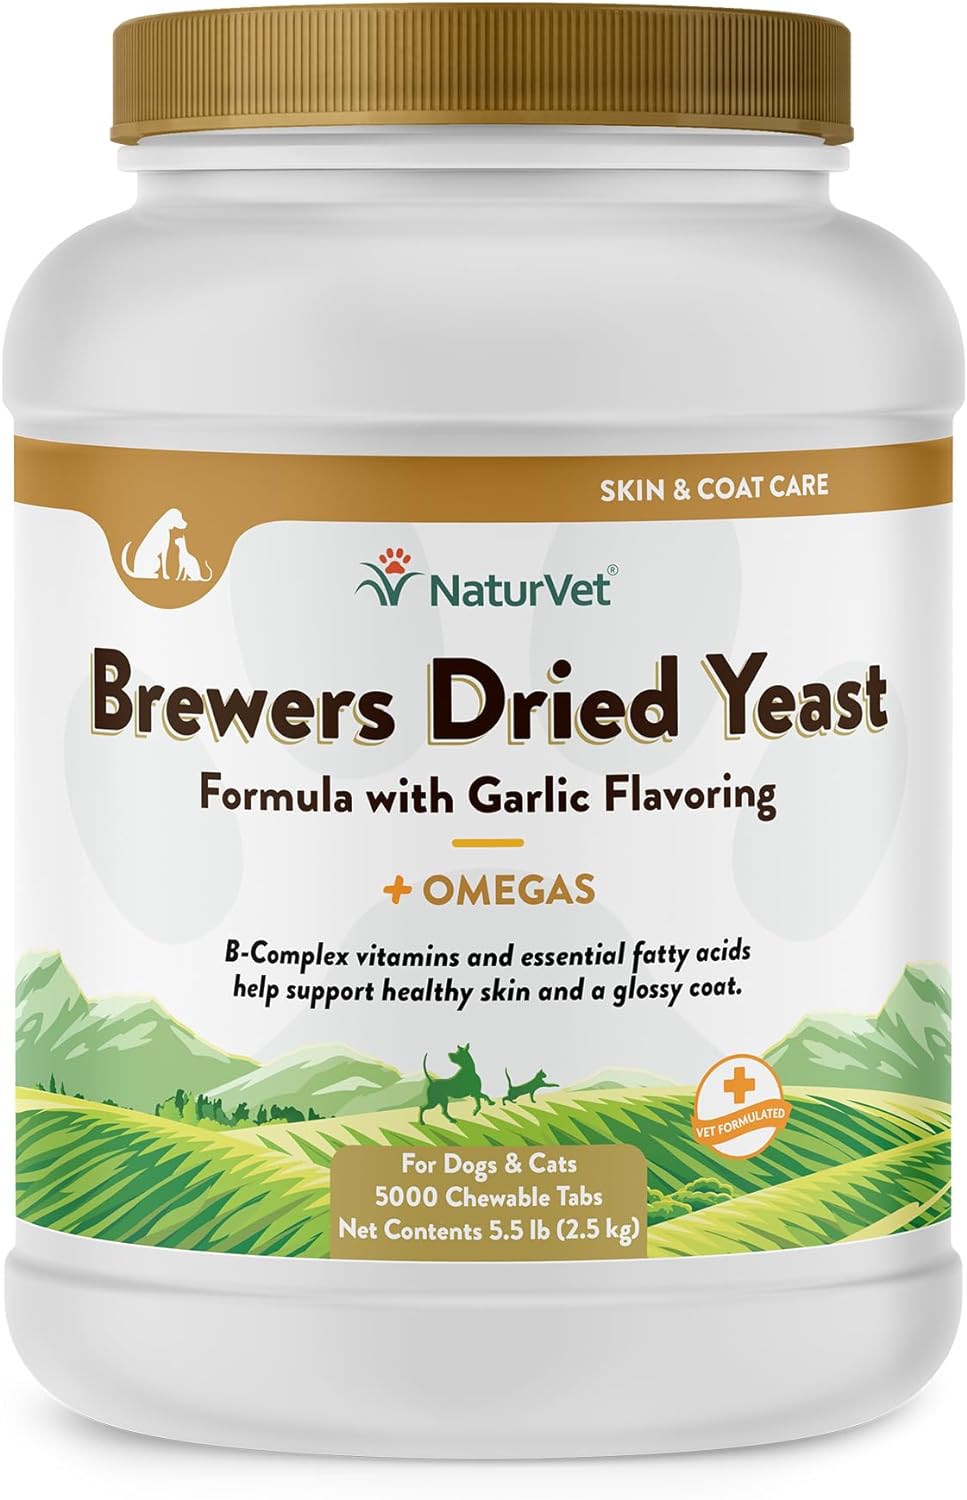 NaturVet Brewer’s Dried Yeast Pet Supplement with Garlic Flavoring – Includes B-Complex Vitamins, Omega-3, 6, & 9 Fatty Acids – Helps Support Glossy Coat, Healthy Skin for Dogs, Cats 5000 Ct